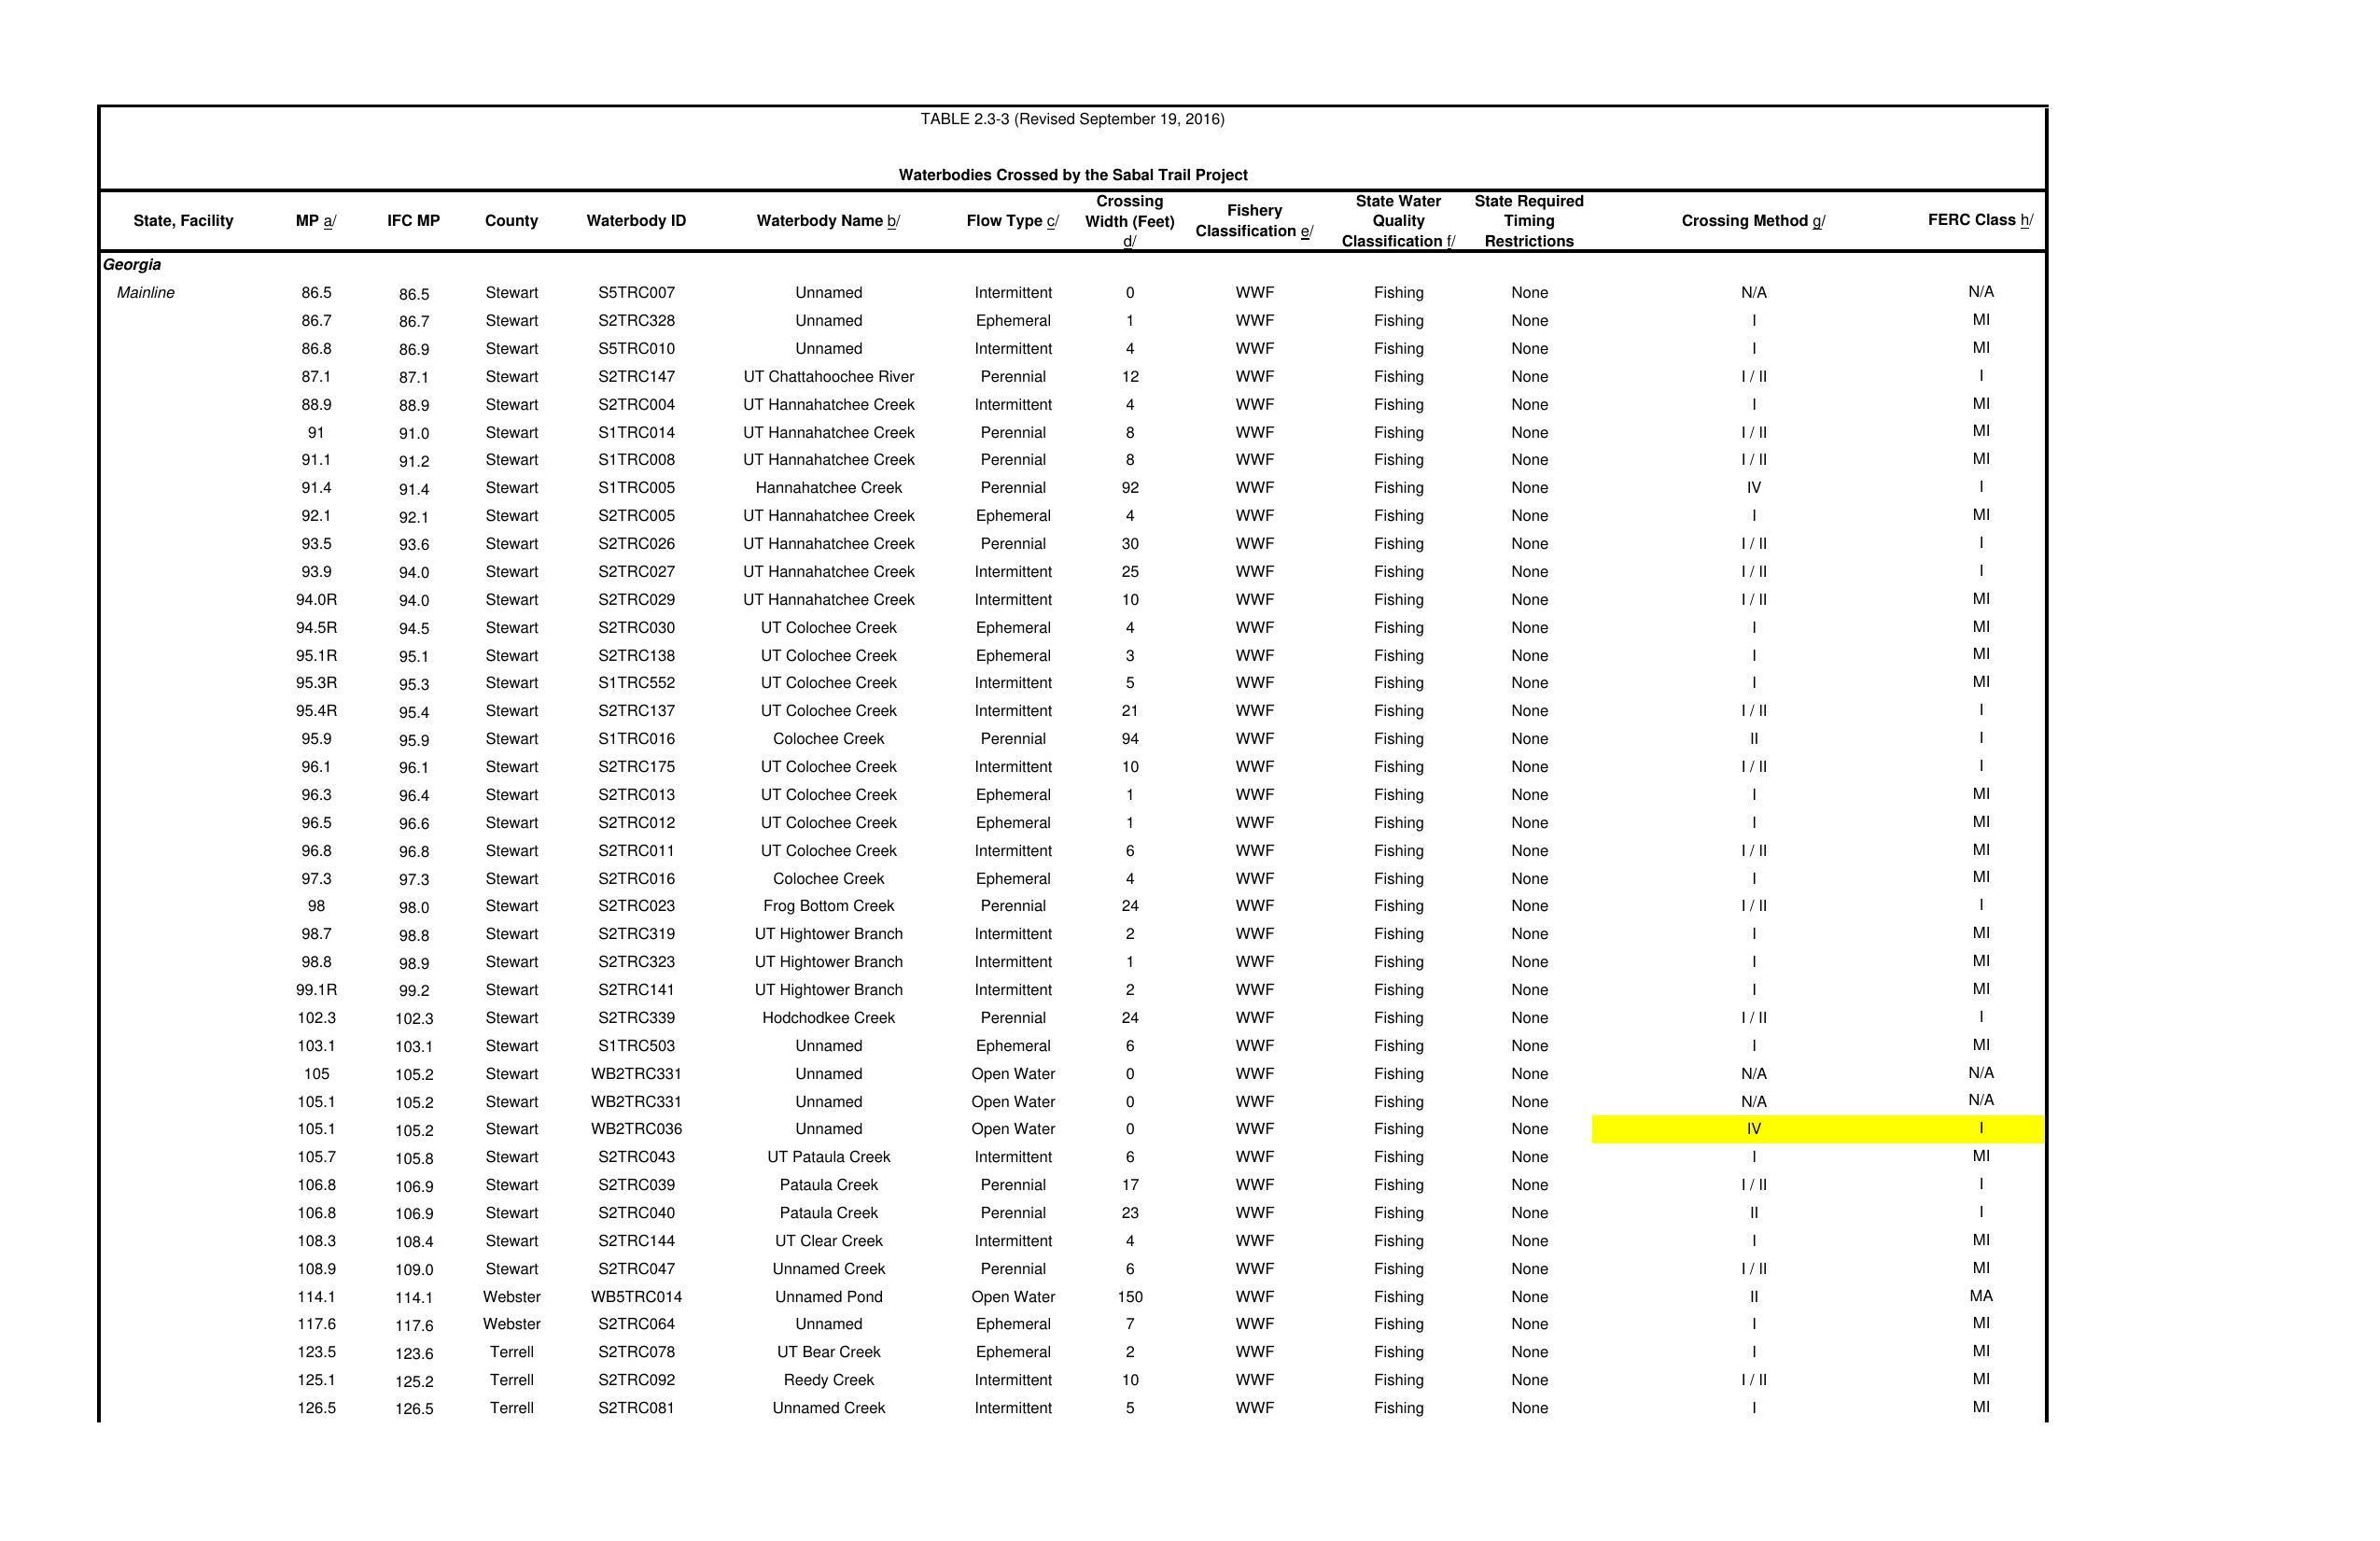 Table 2.3-3 Rev. 2016-09-19 Waterbodies Crossed by Sabal Trail Project (1 of 5)